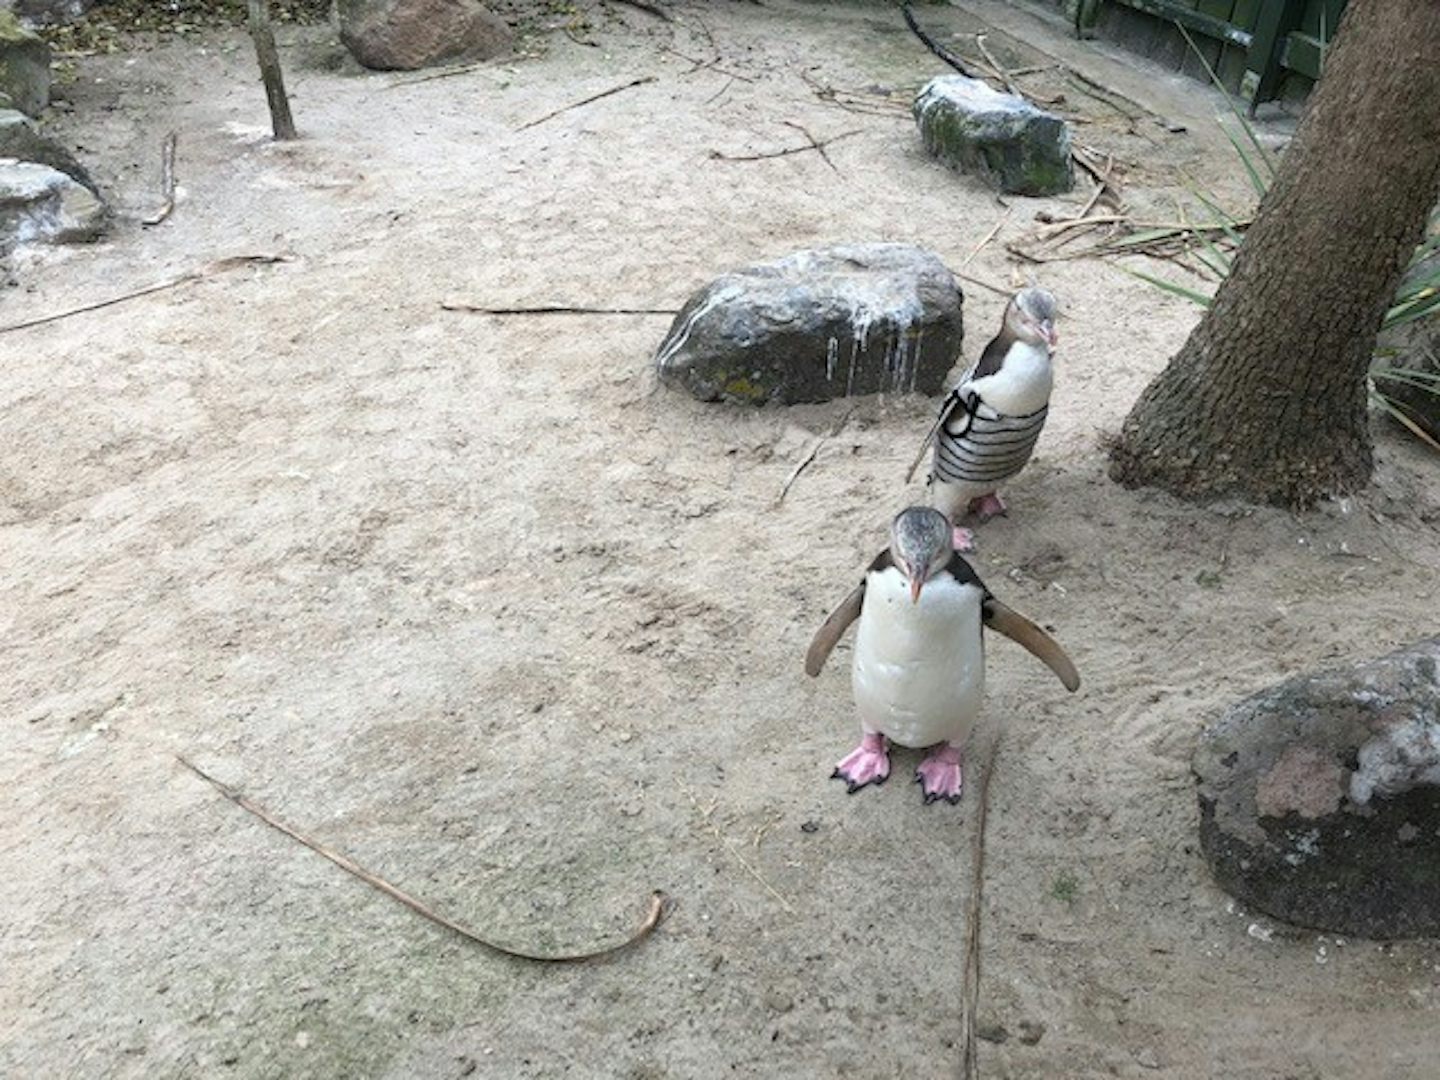 The Penguin Place